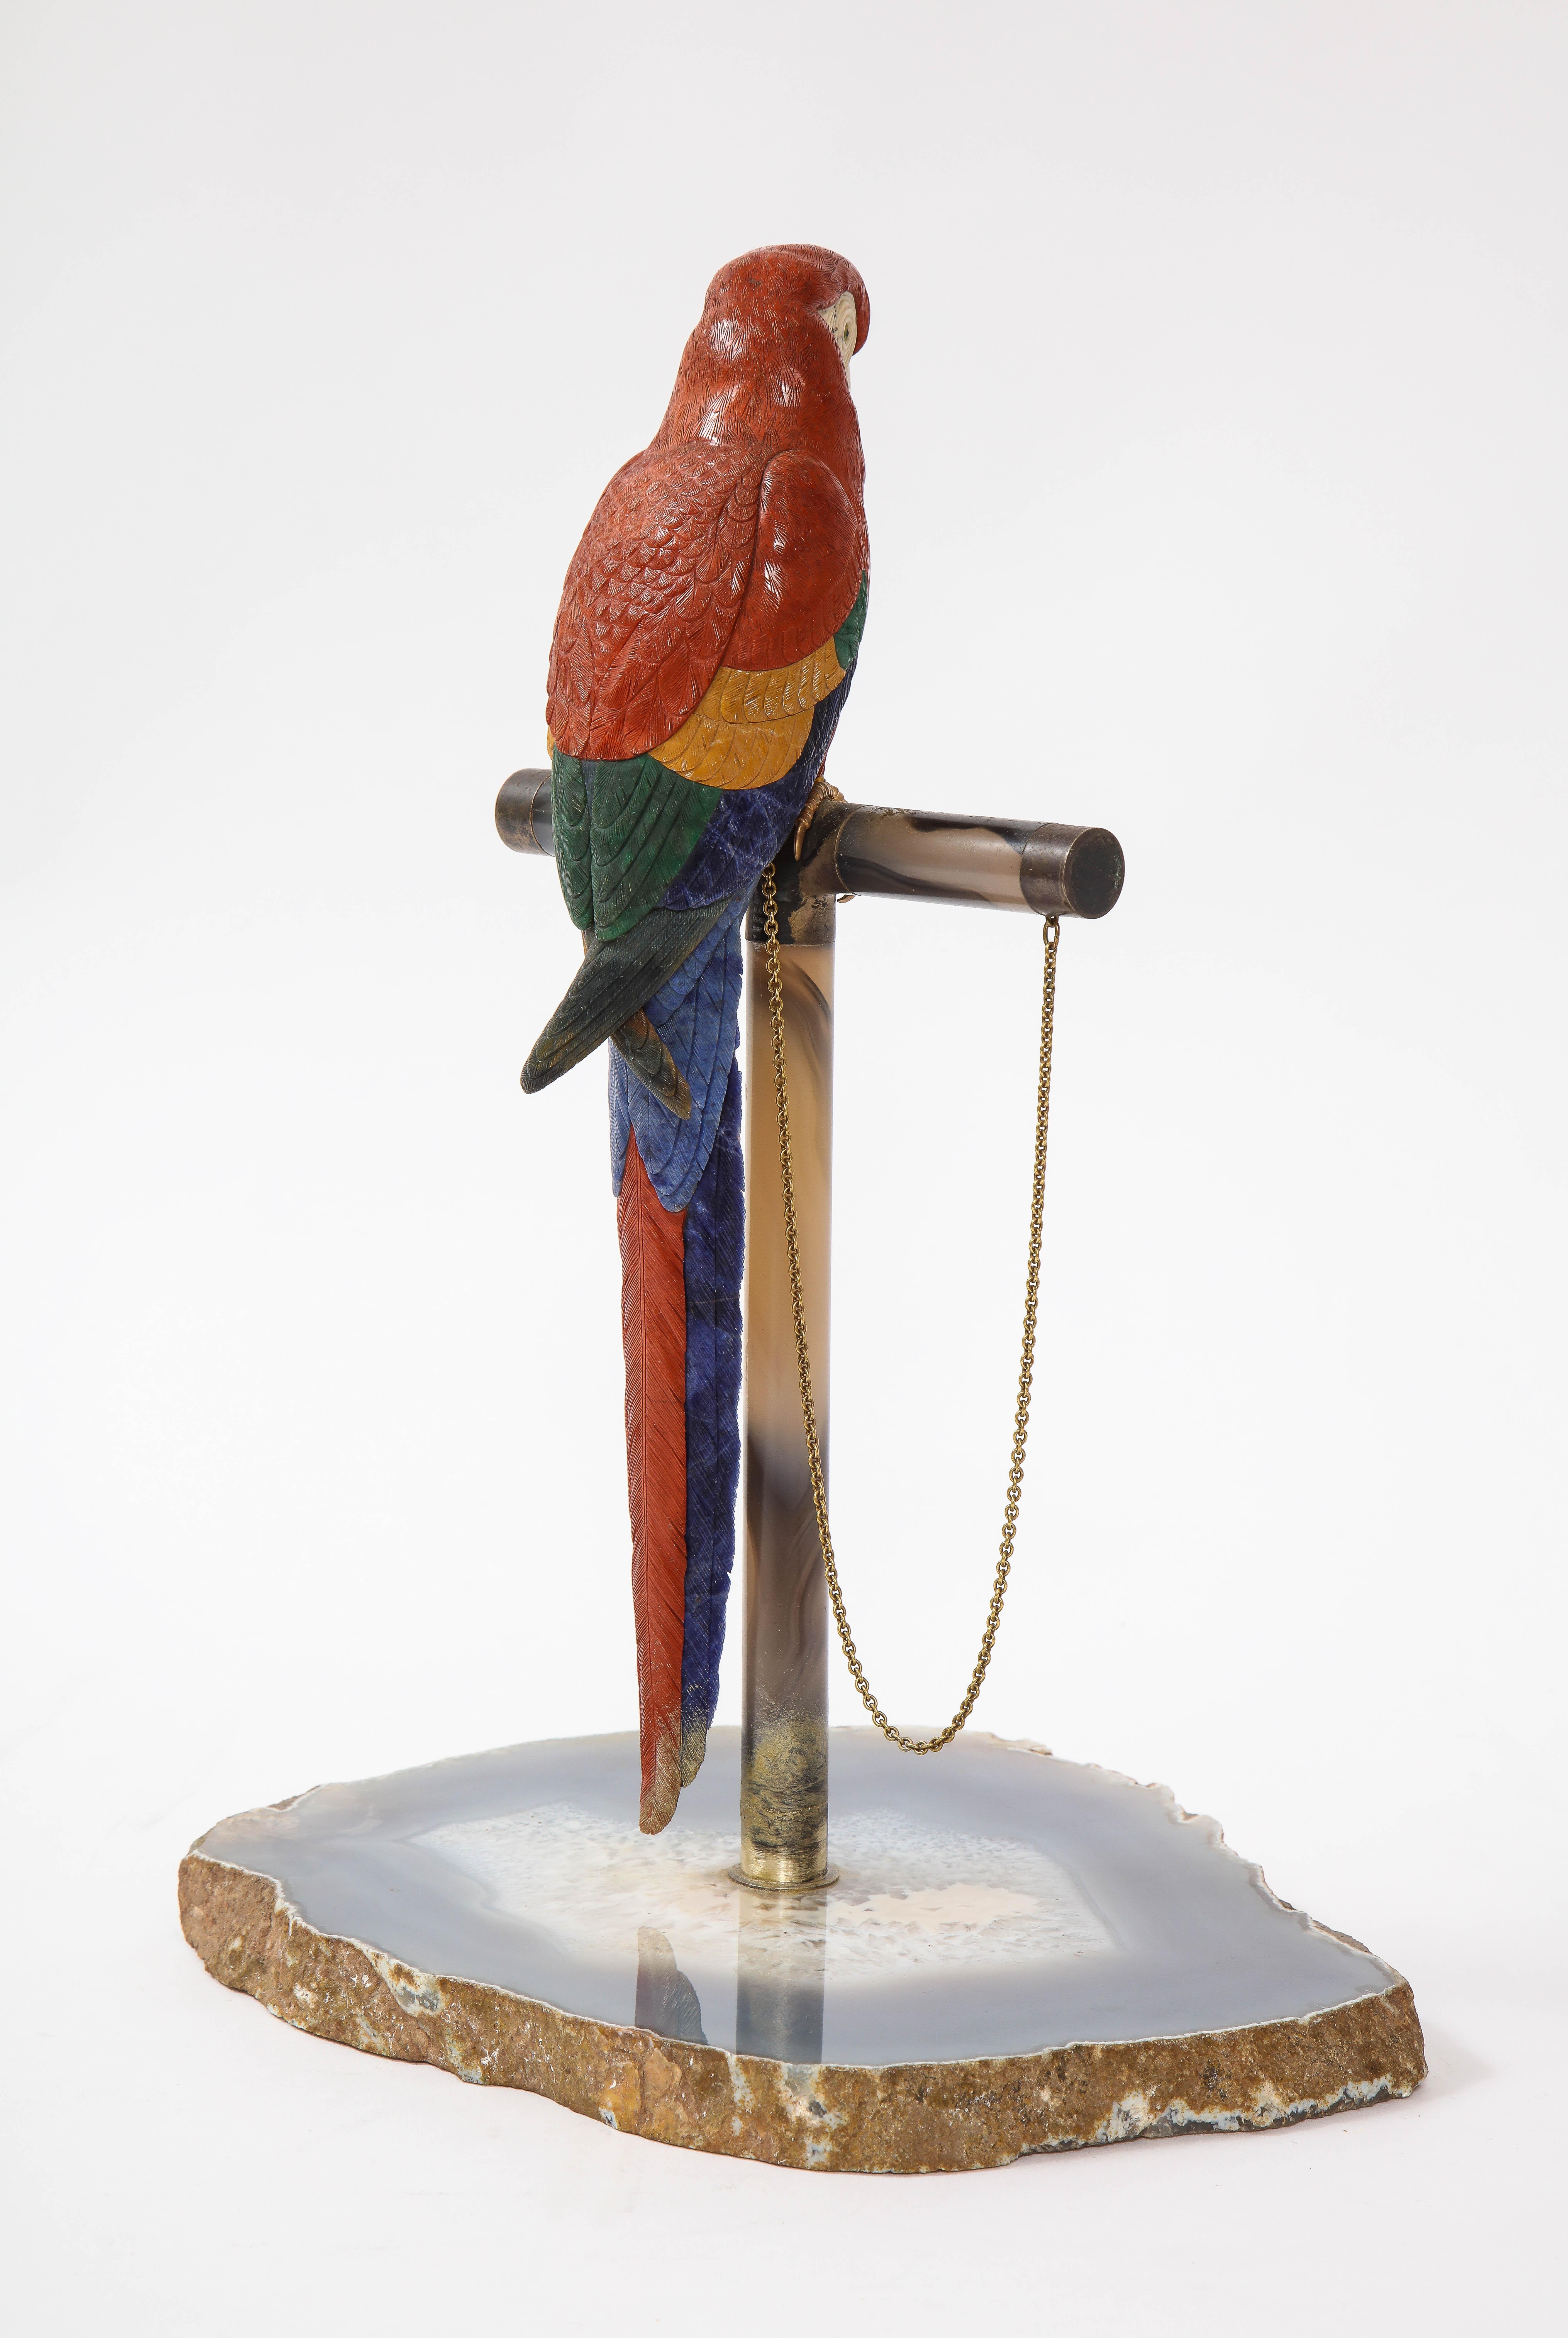 Cast Semi Precious Stone & Metal Model of a Scarlet Macaw Parrot, P. Müller, Swiss